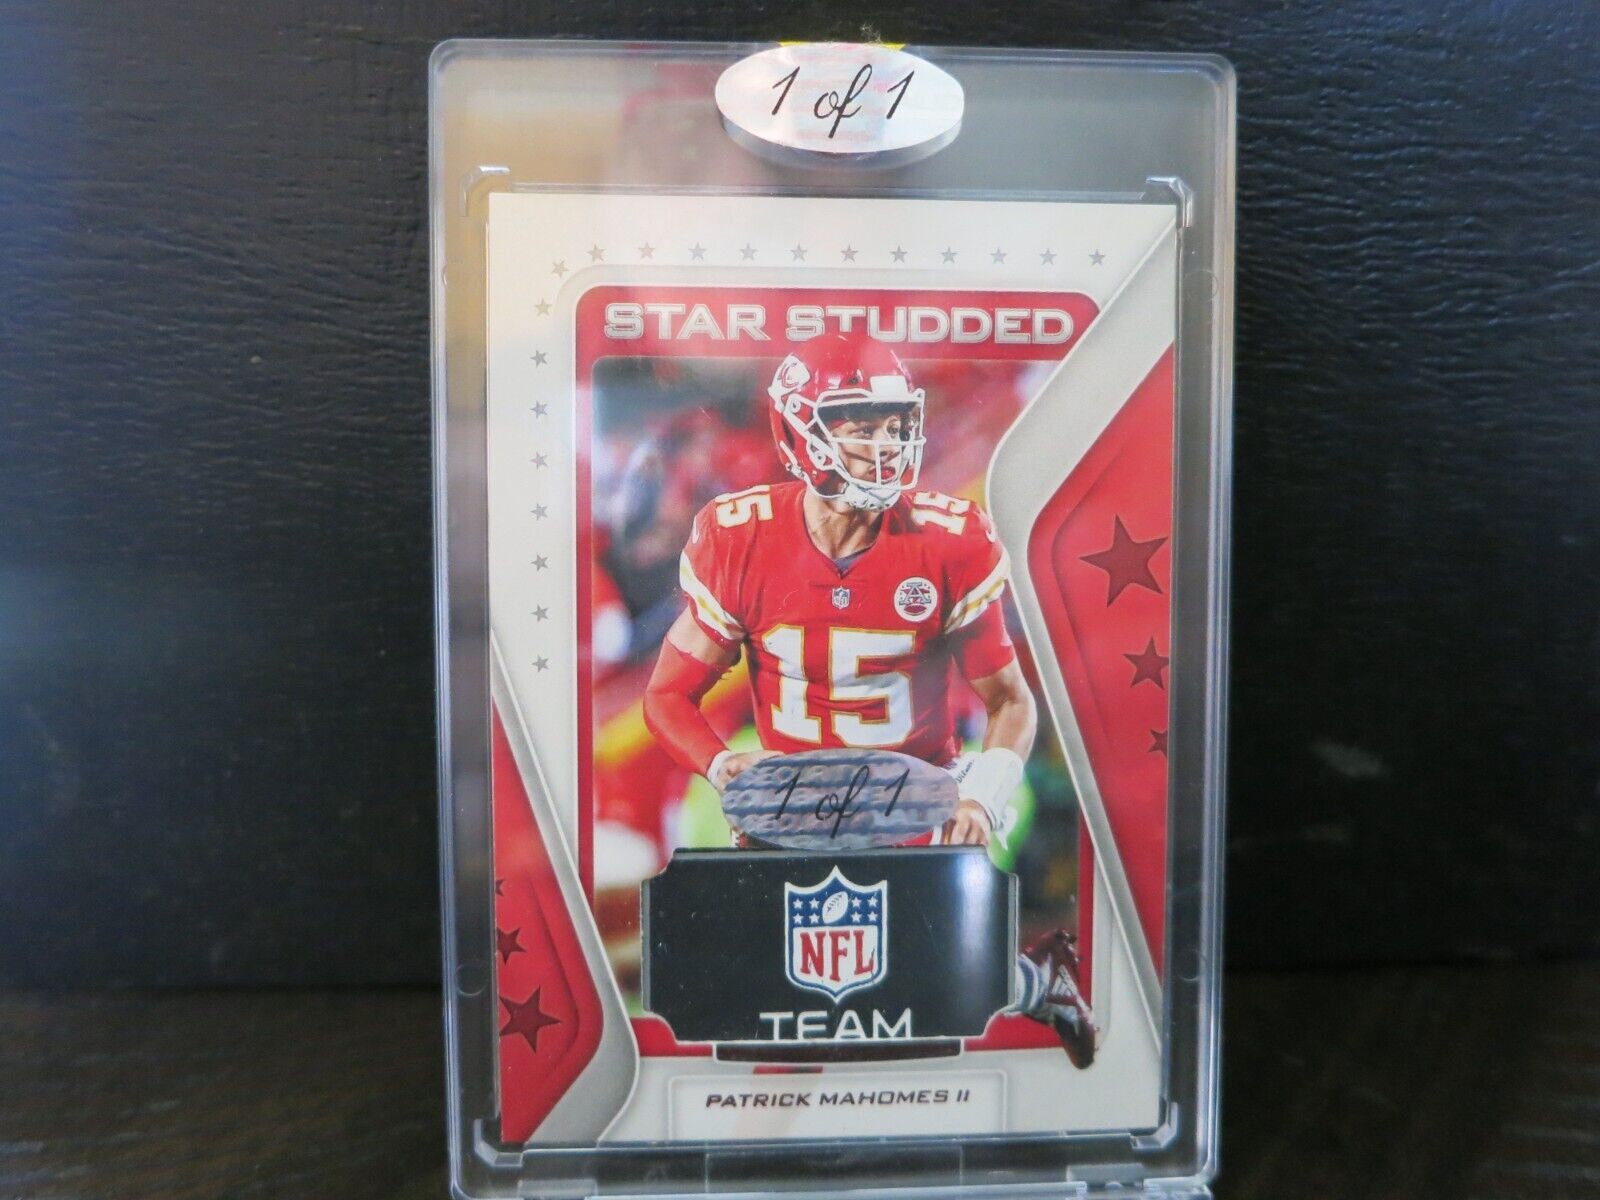 STAR STUDDED PATRICK MAHOMES NFL TEAM PATCH 1 OF 1 (RARE)